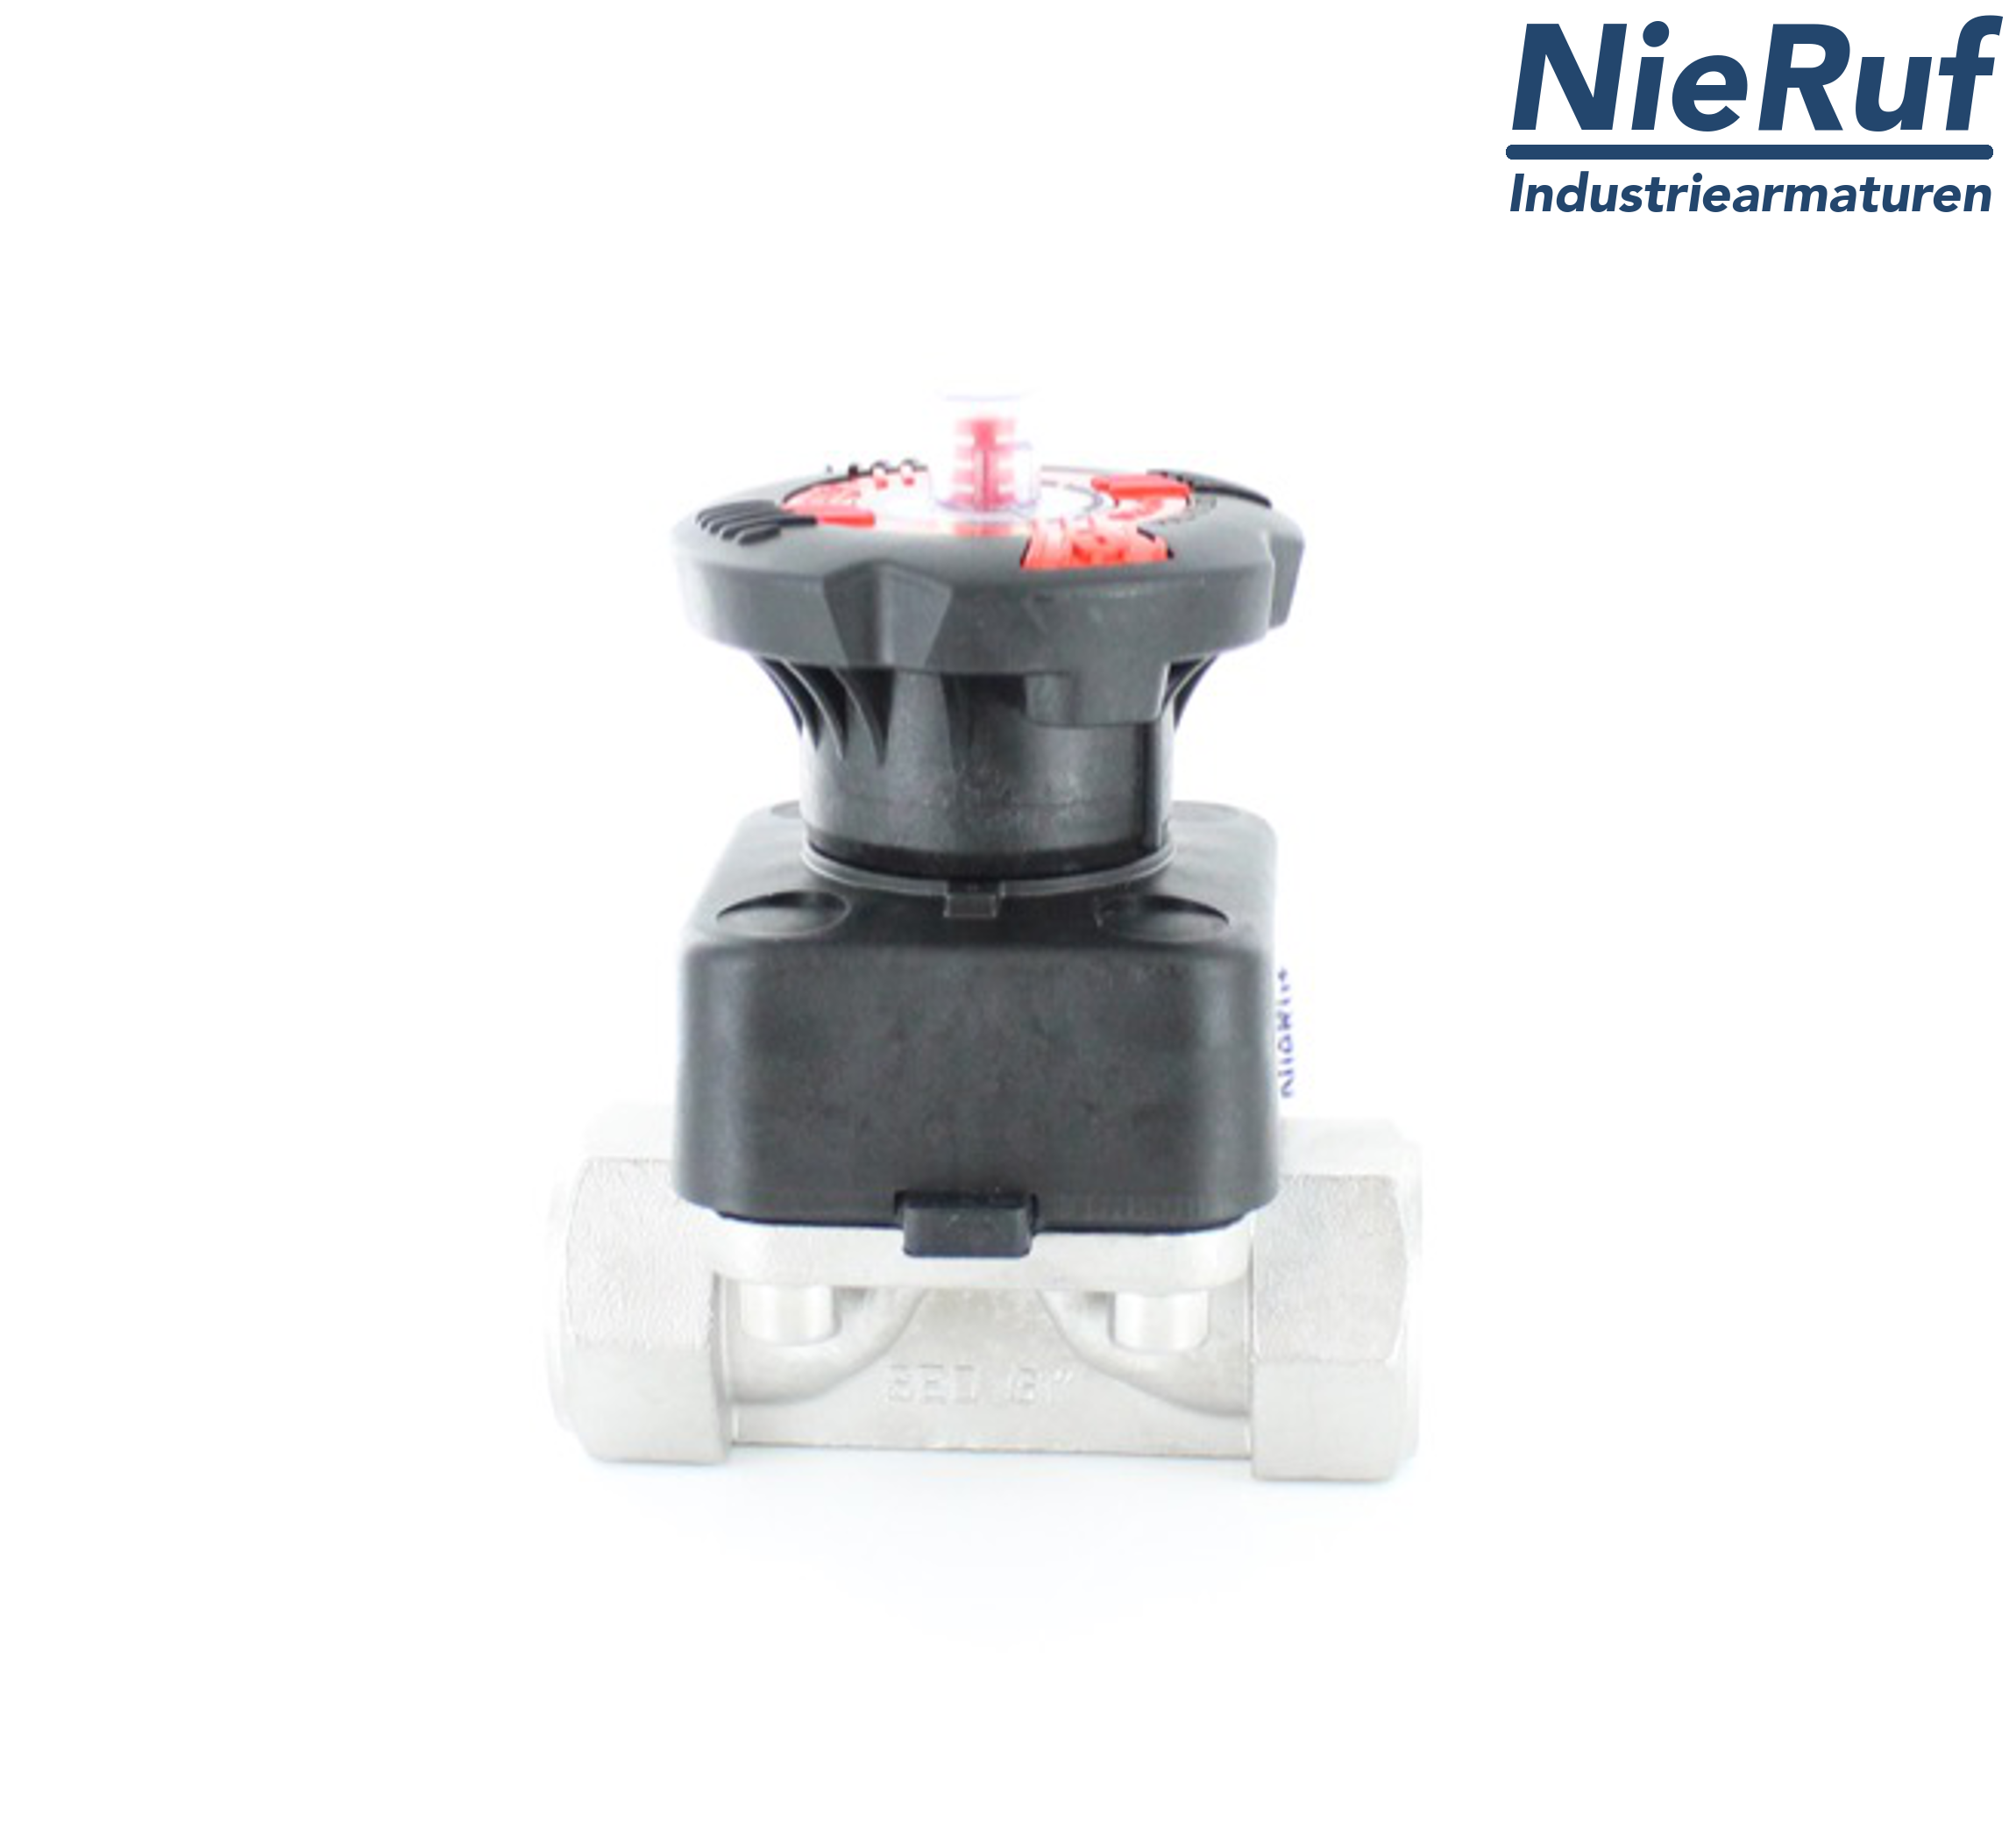 stainless steel-diaphragm valve 2 Inch membrane PTFE/EPDM two-piece female thread BSP